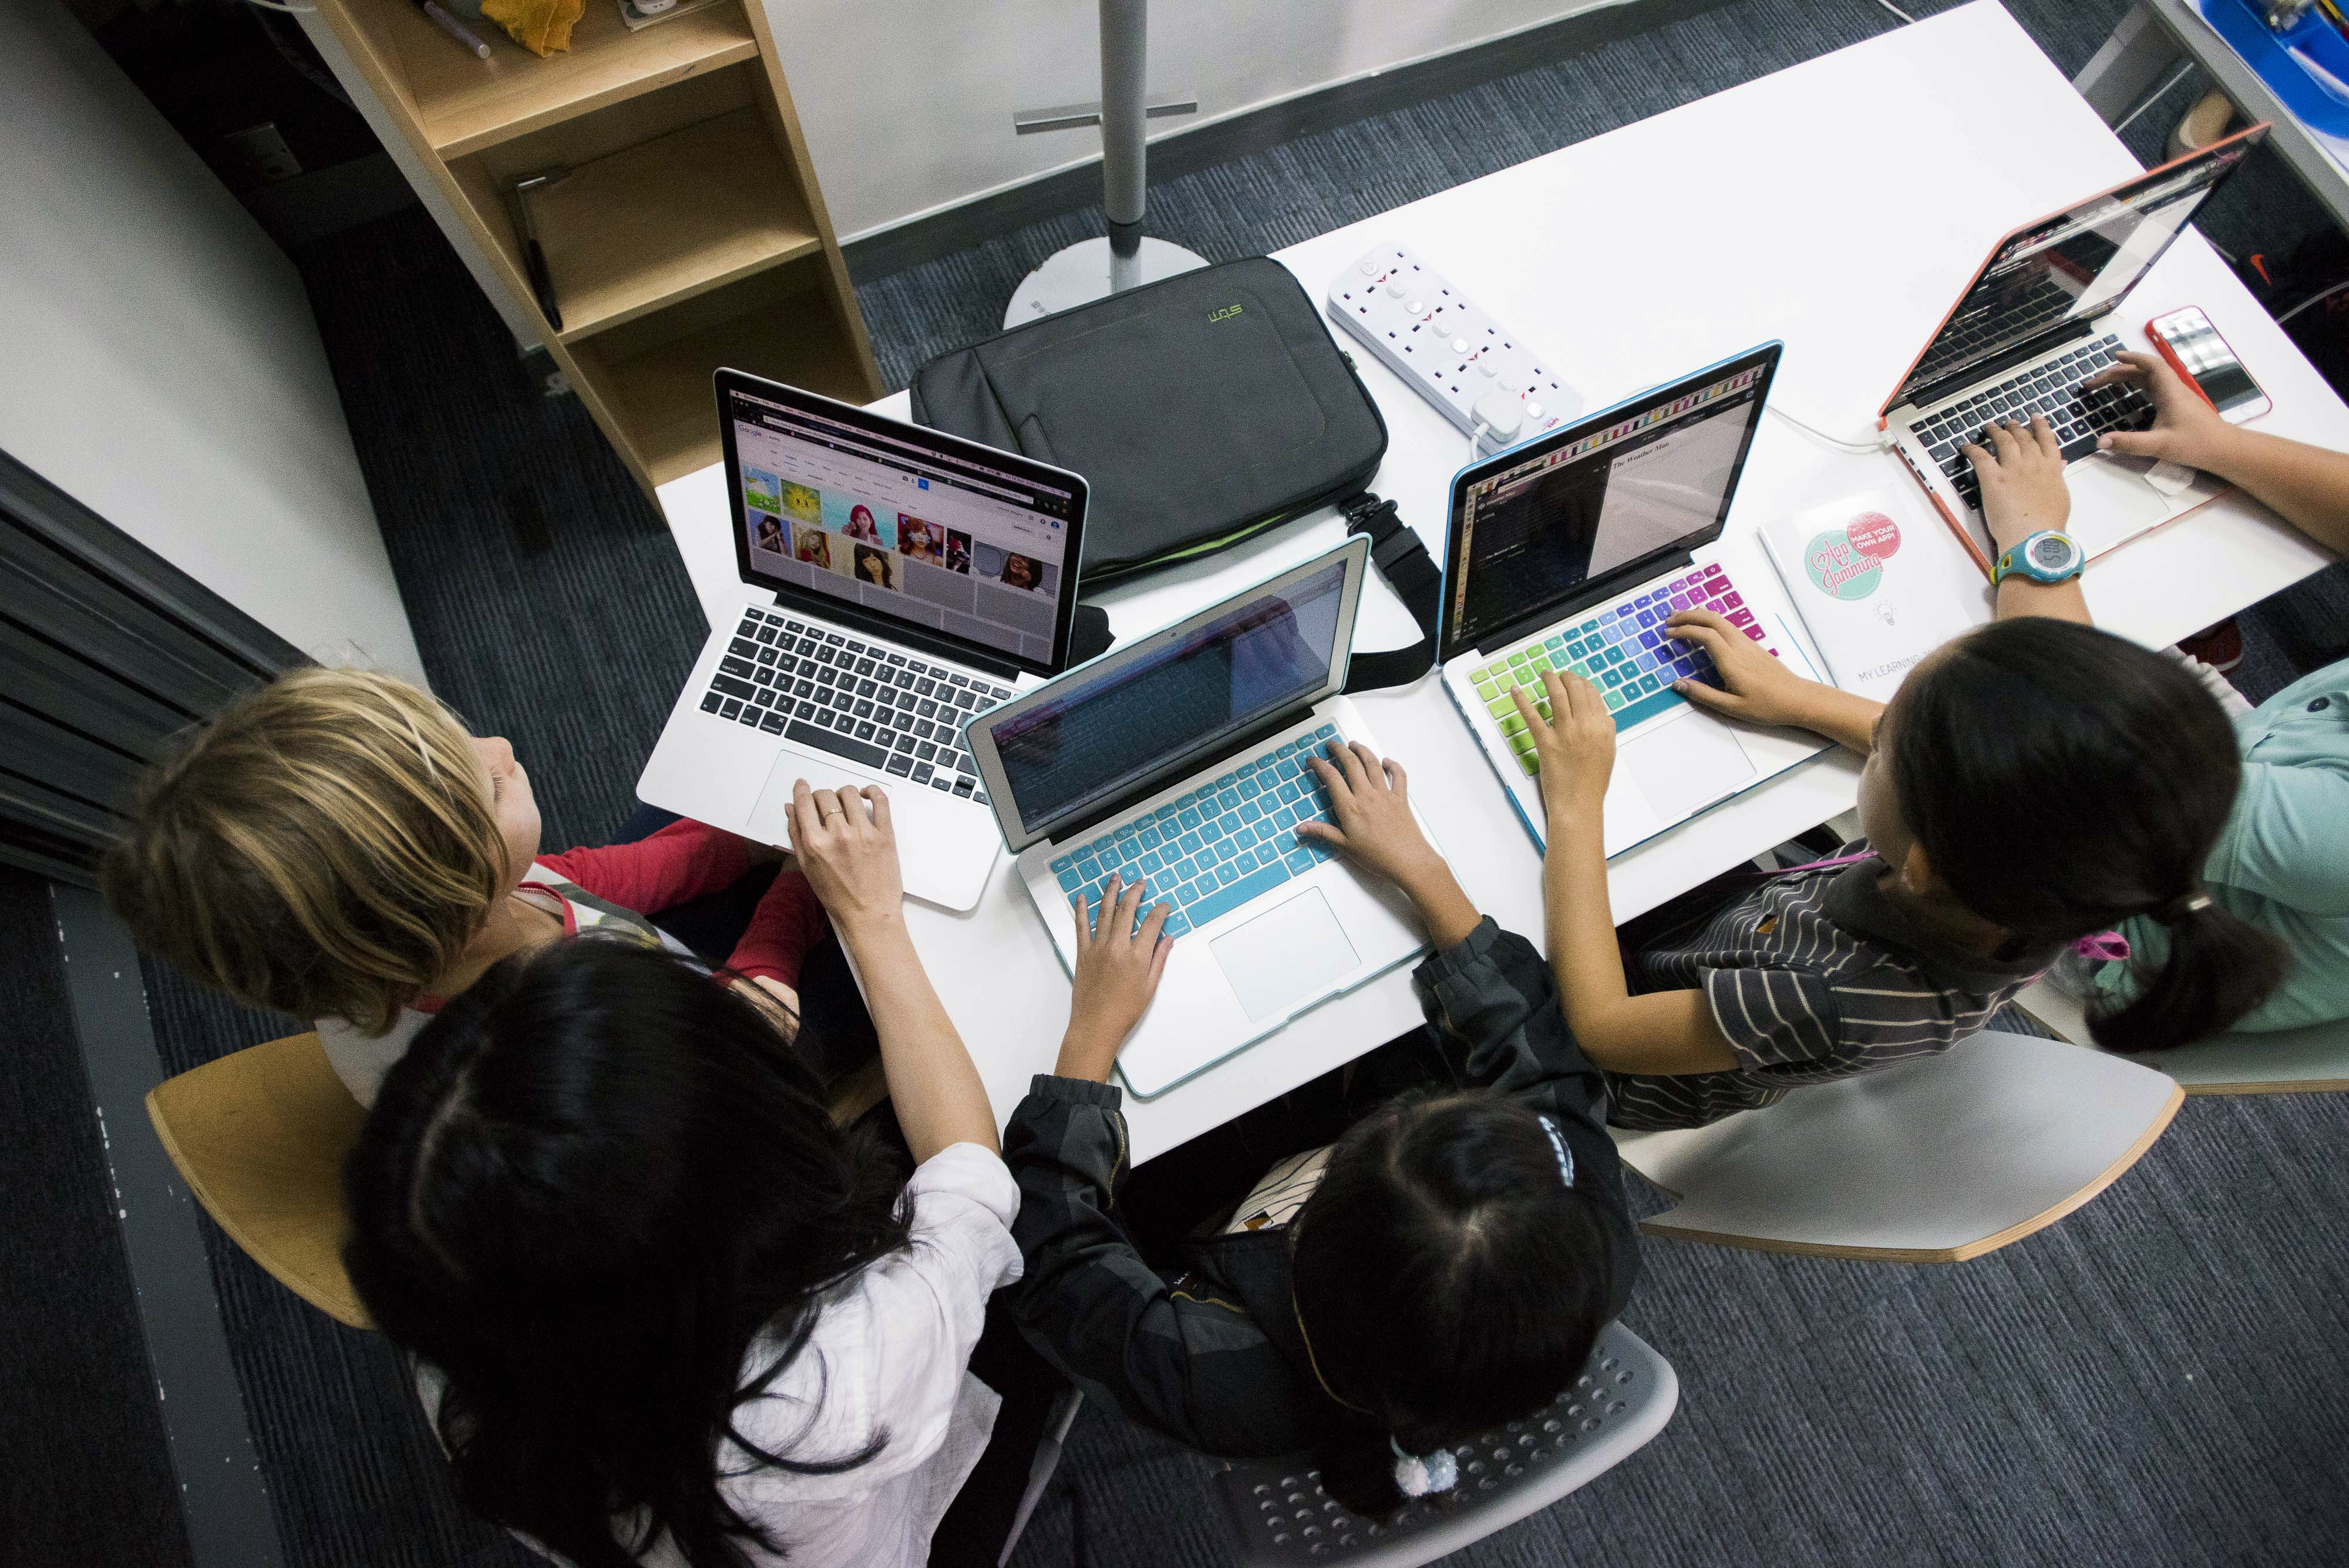 Students type on Apple Inc. laptop computers during a coding class at the First Code Academy in Hong Kong, China, on Friday, Nov. 13, 2015. About 2,500 students have taken courses at the First Code Academy. (Bloomberg&mdash;Bloomberg via Getty Images)